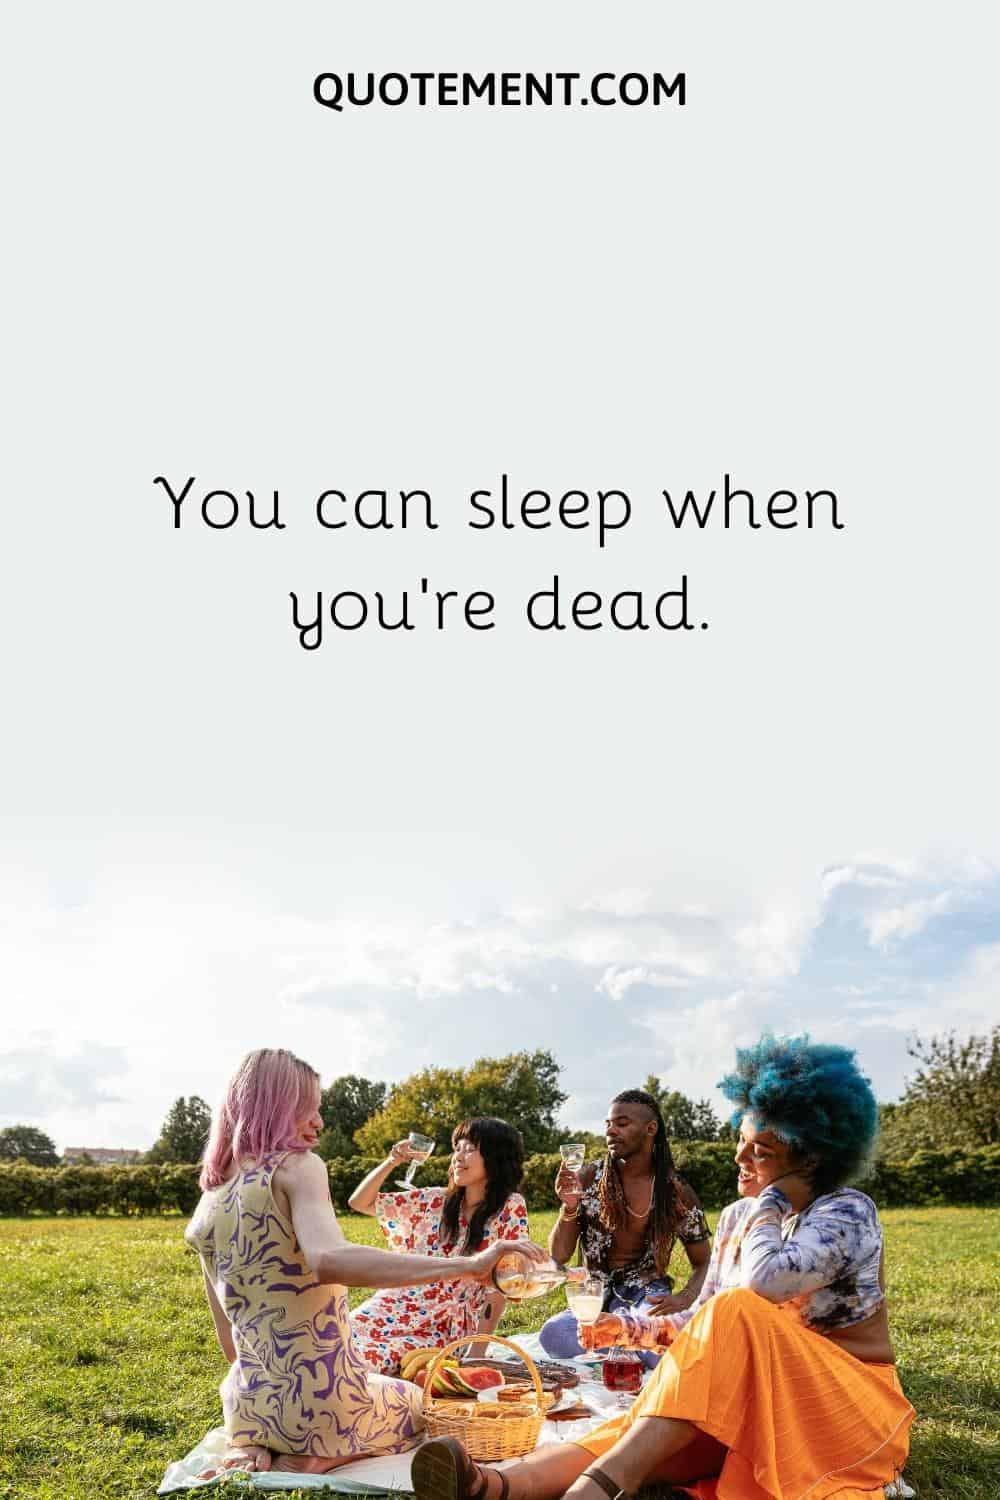 You can sleep when you're dead.